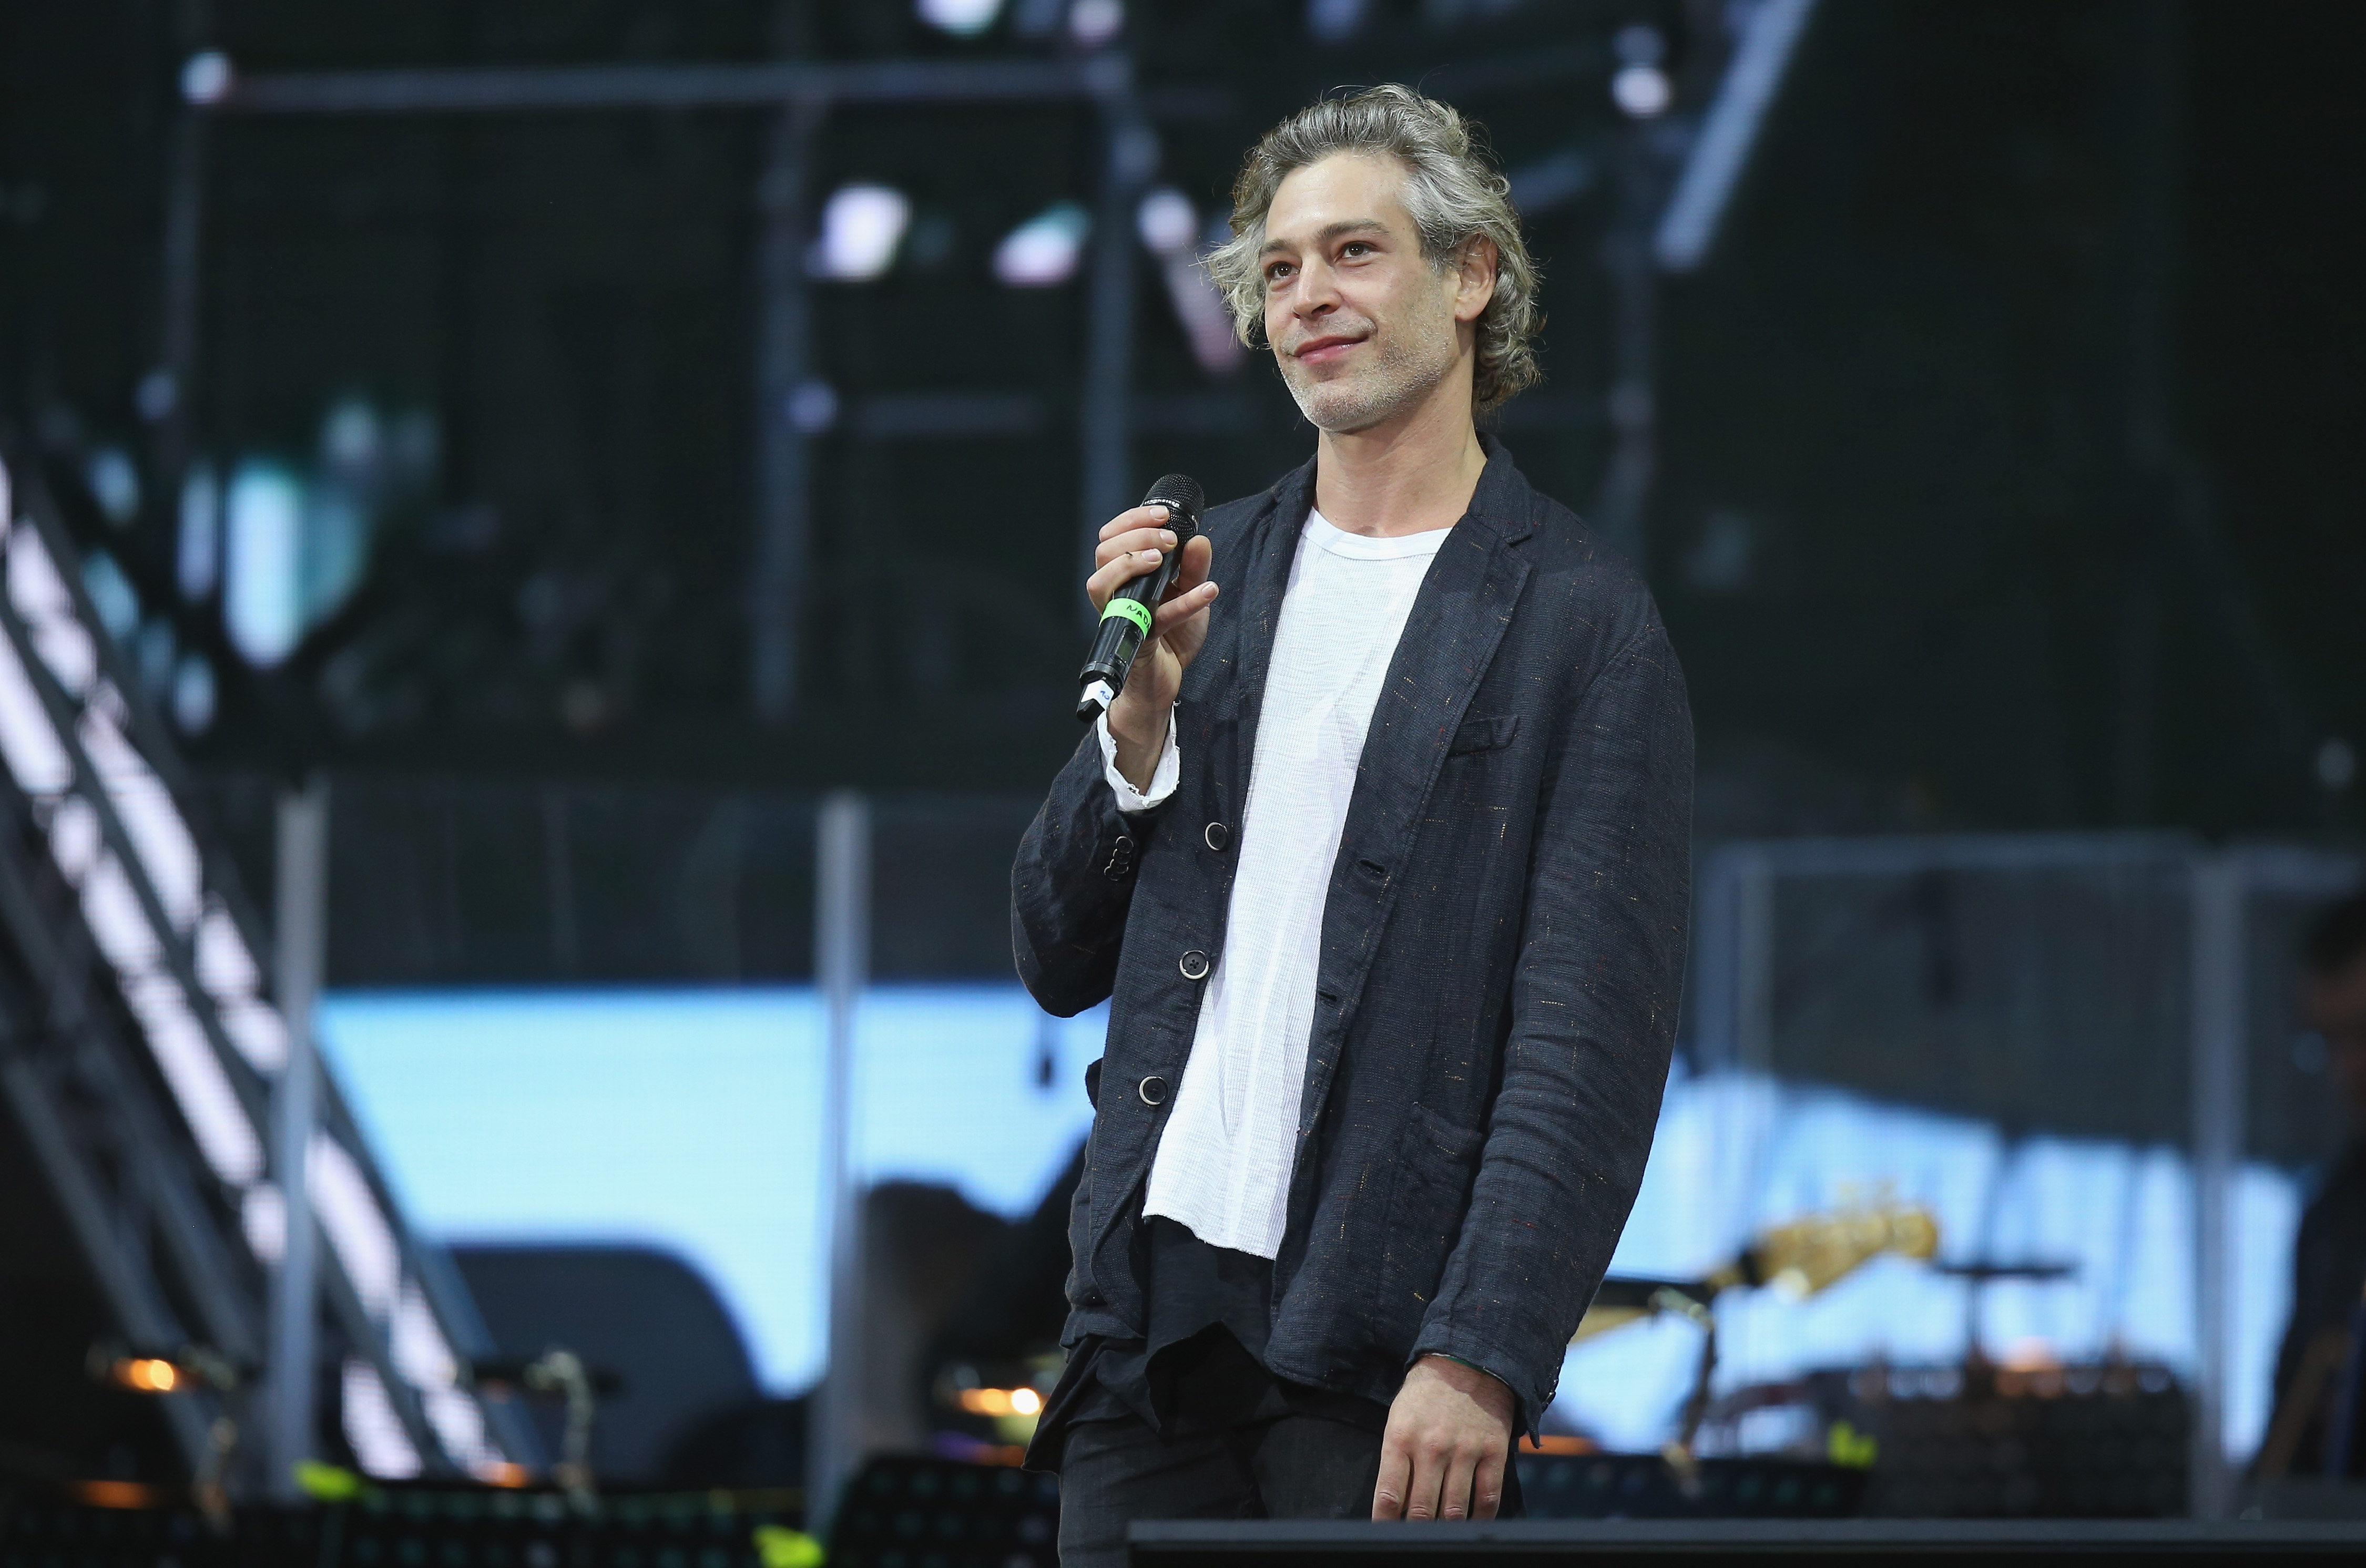 Singer Matisyahu performs at the official opening ceremony of the European Maccabi Games at the Waldbuehne in Berlin on July 28, 2015.